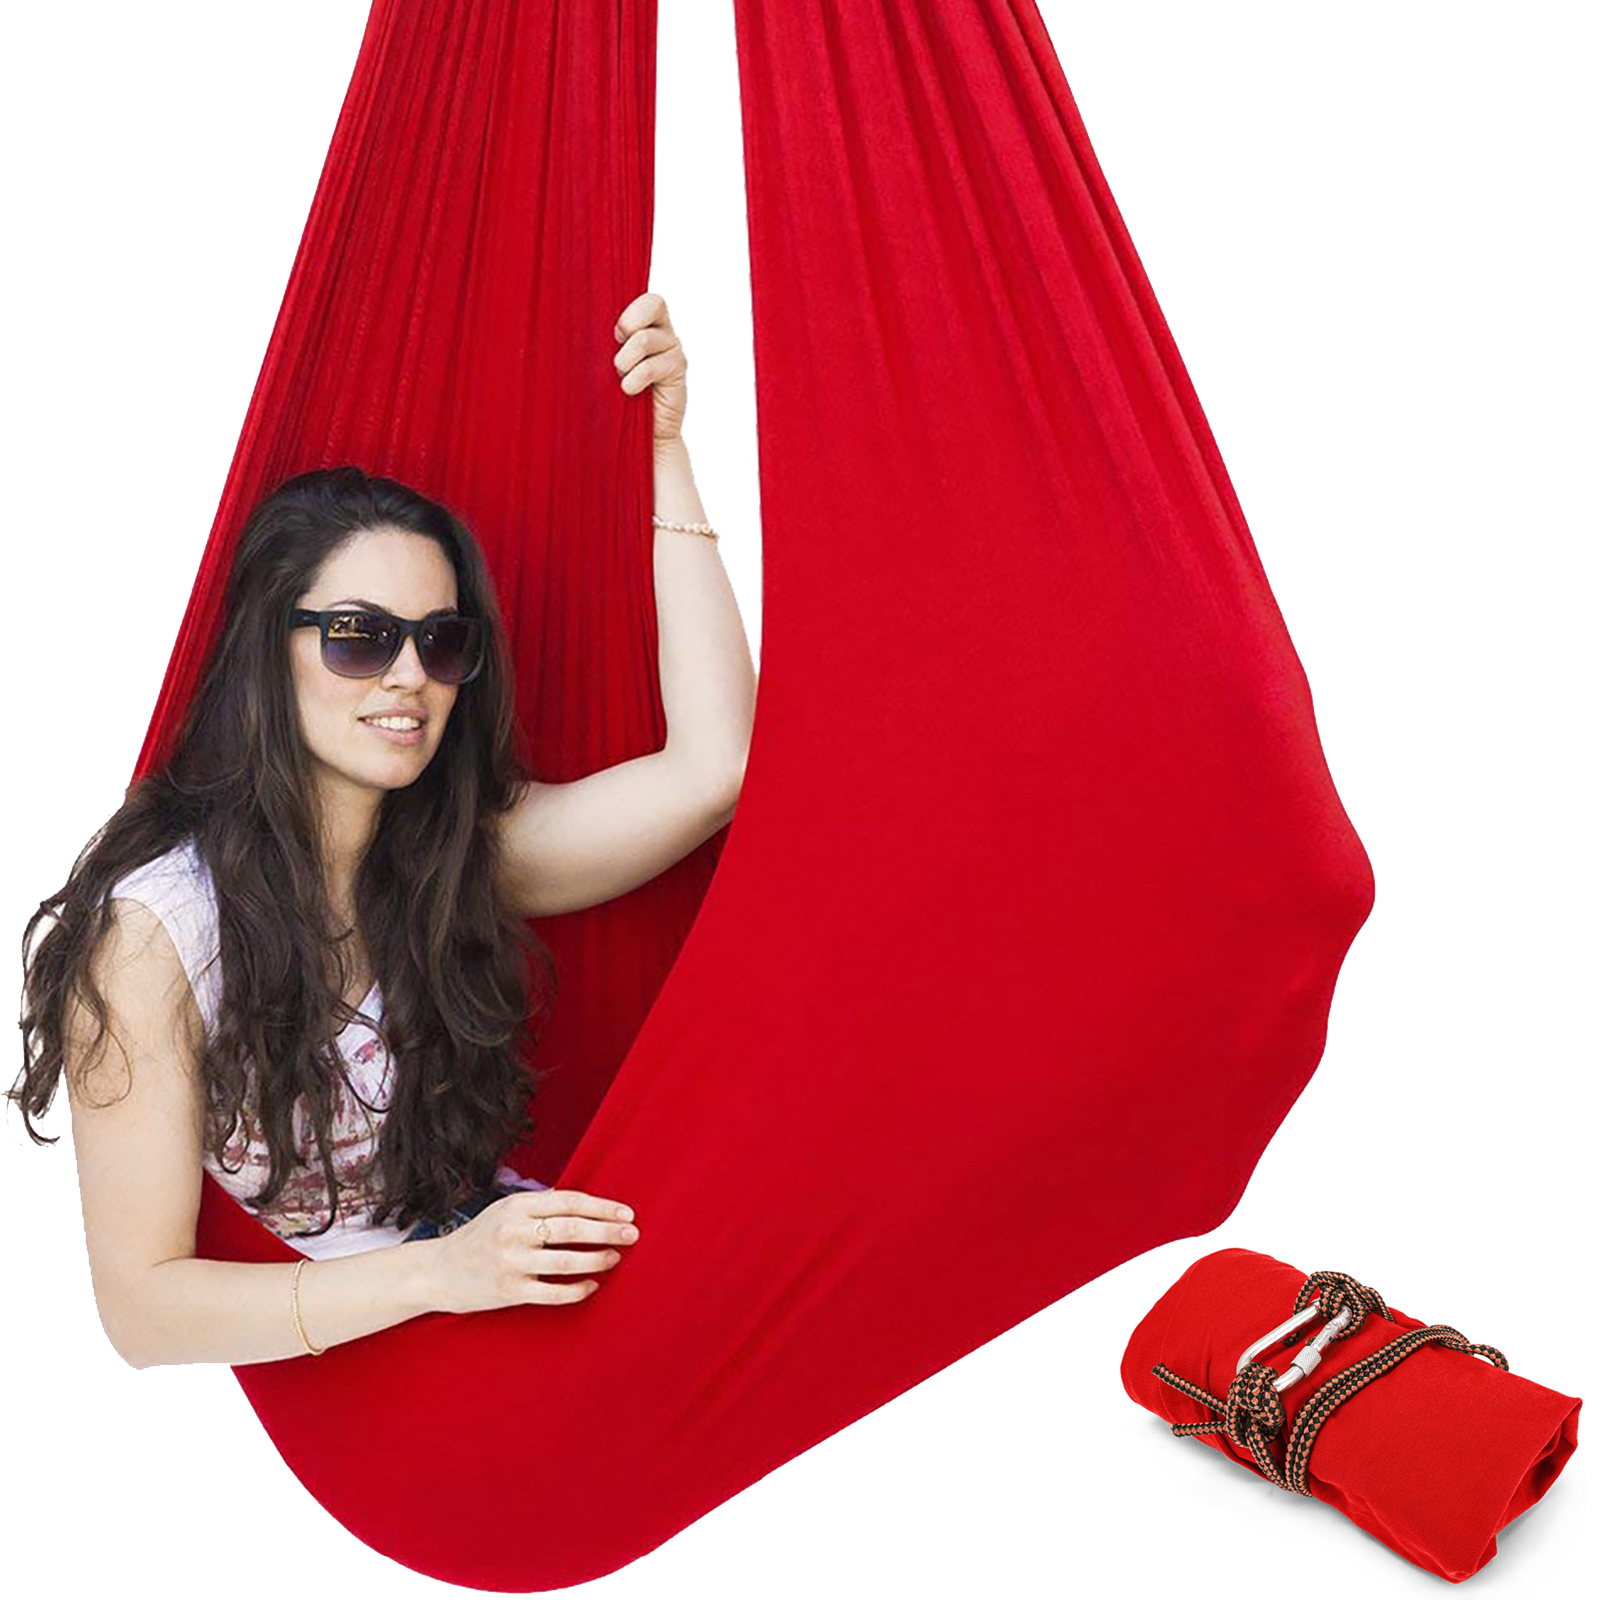 Soft Swing Hammock for Autism ADHD ADD Therapy Cuddle Up to 220LBS Sensory Red от Vevor Many GEOs